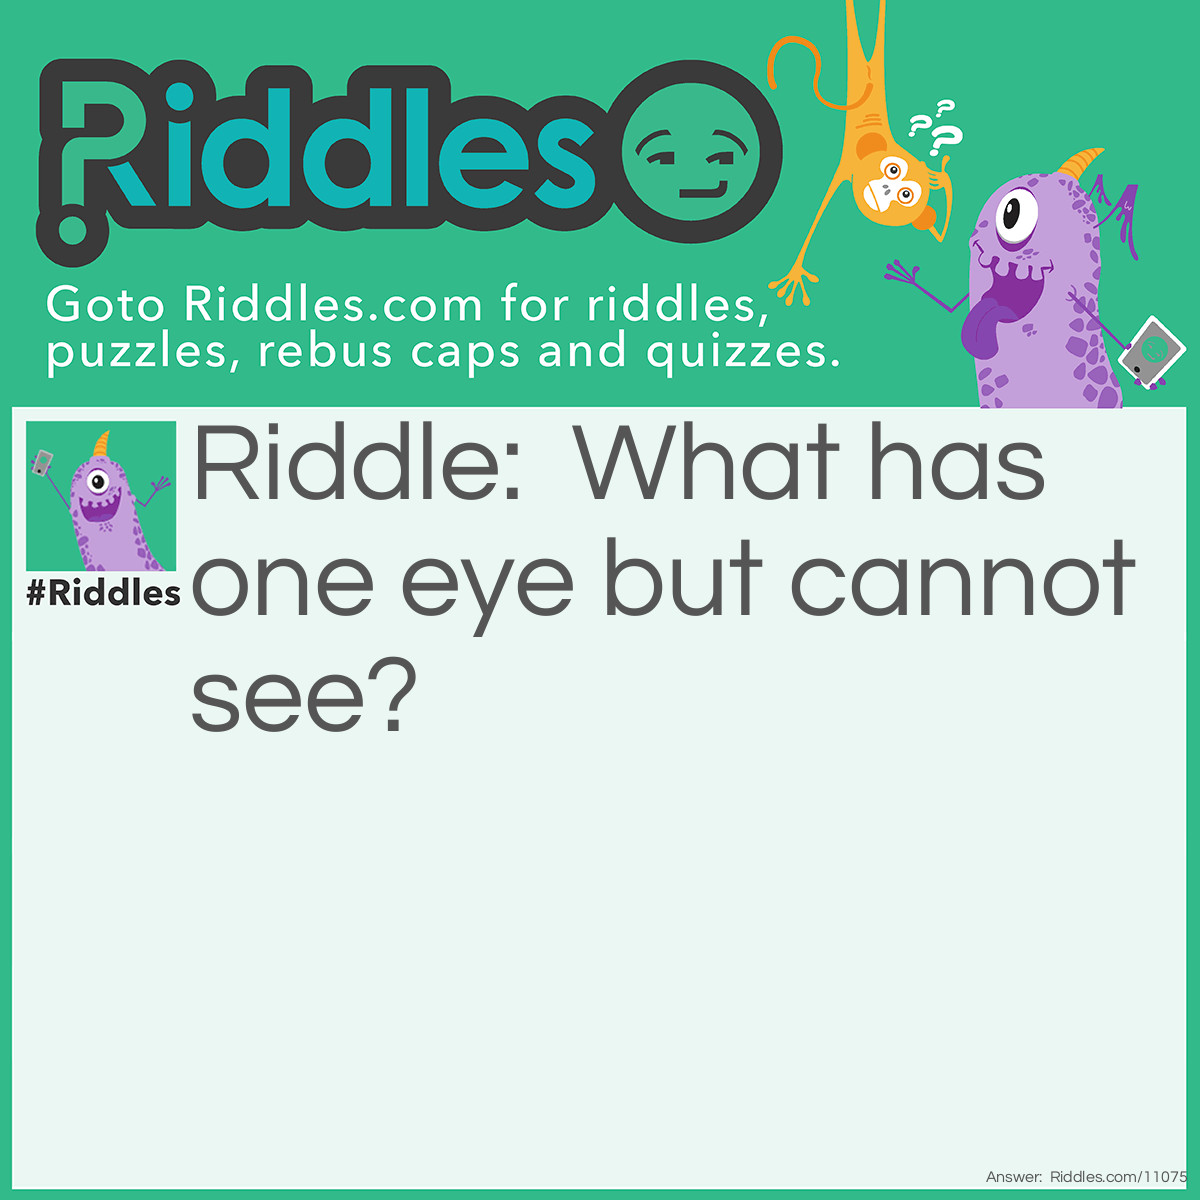 Riddle: What has one eye but cannot see? Answer: A needle.